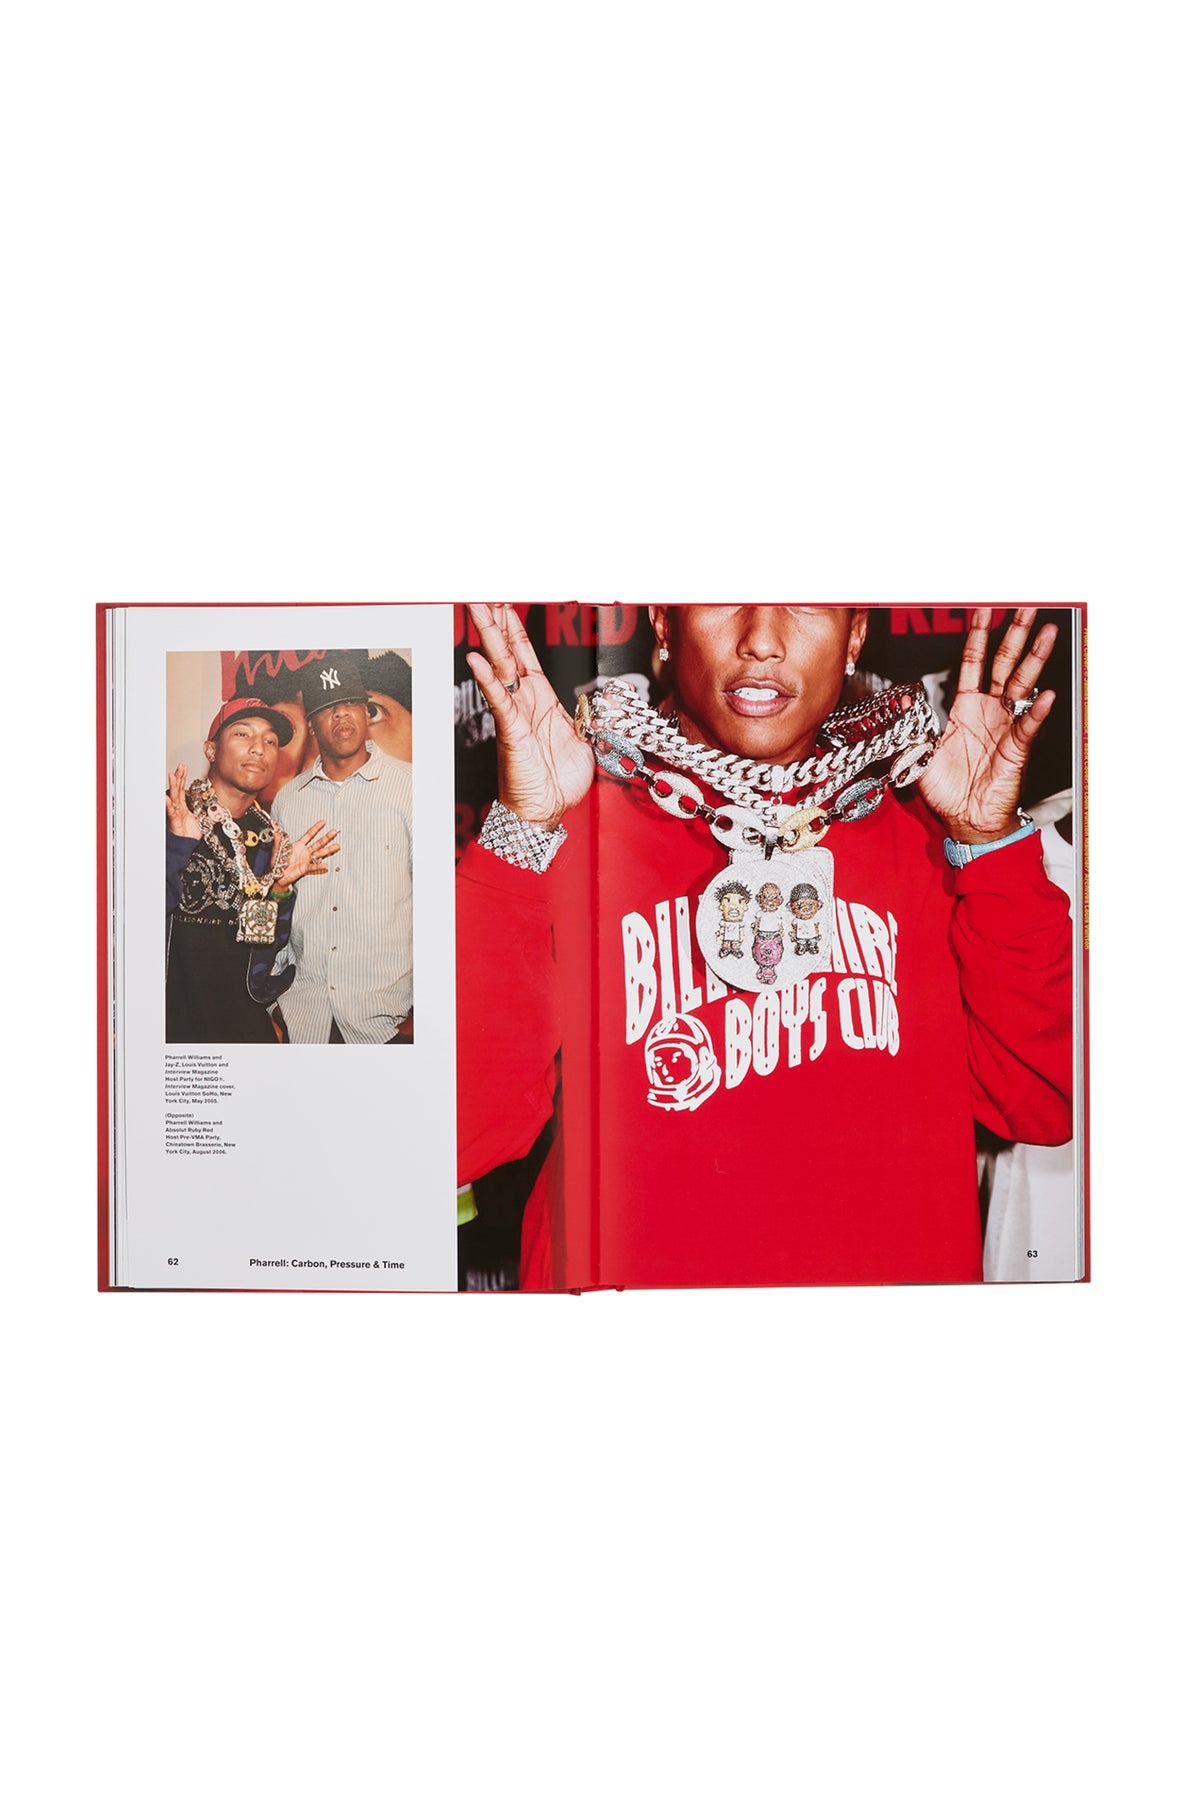 PHARRELL: CARBON, PRESSURE & TIME: A BOOK OF JEWELS / 2023